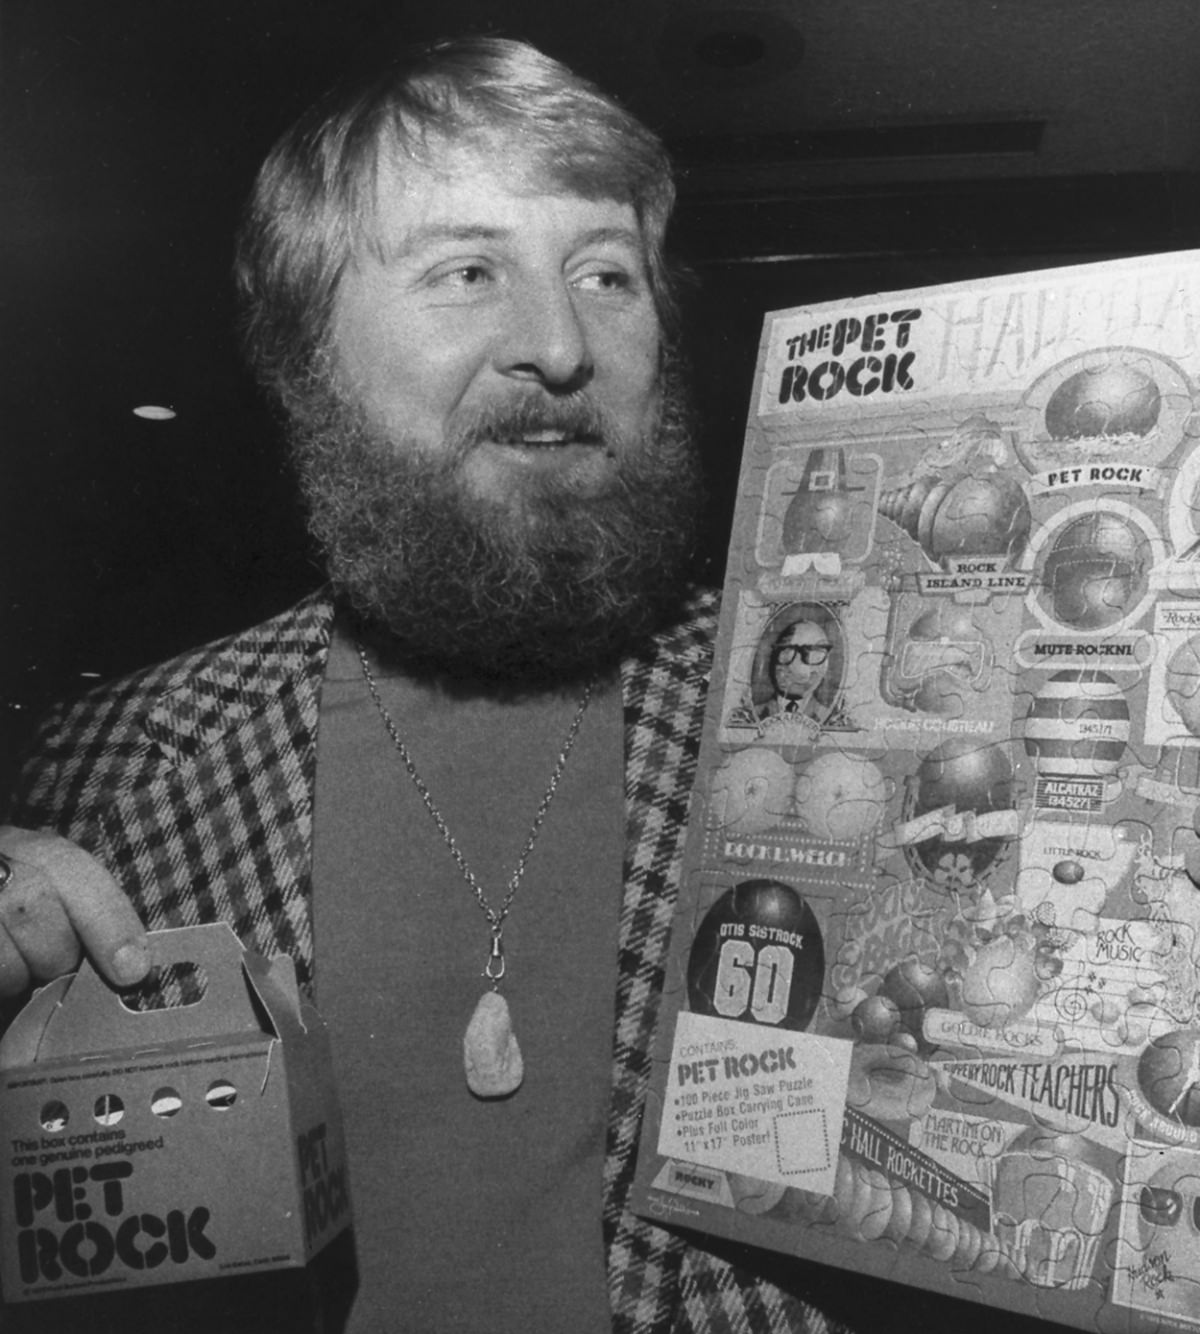 Gary Dahl in 1975 with the Pet Rock.